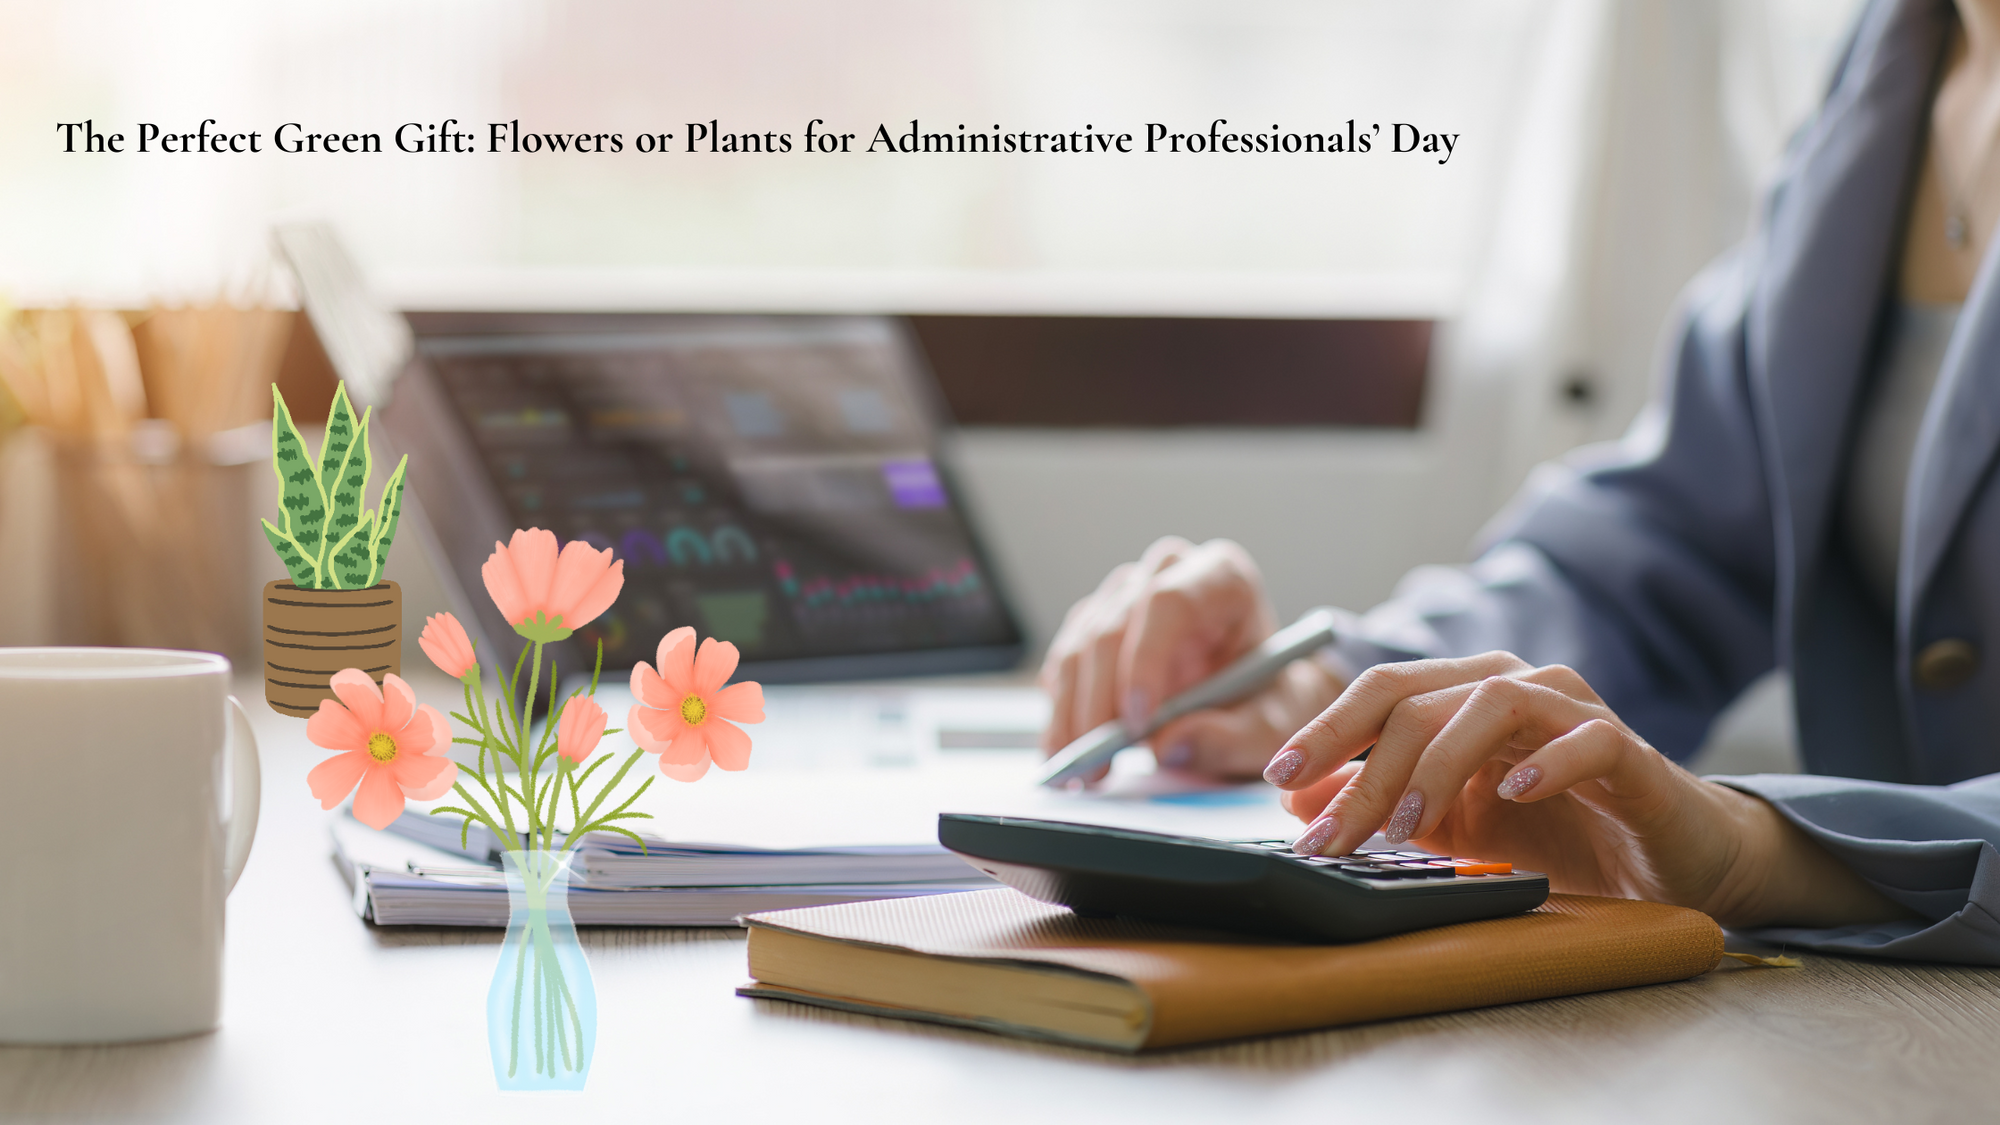 The Perfect Green Gift: Flowers or Plants for Administrative Professionals’ Day